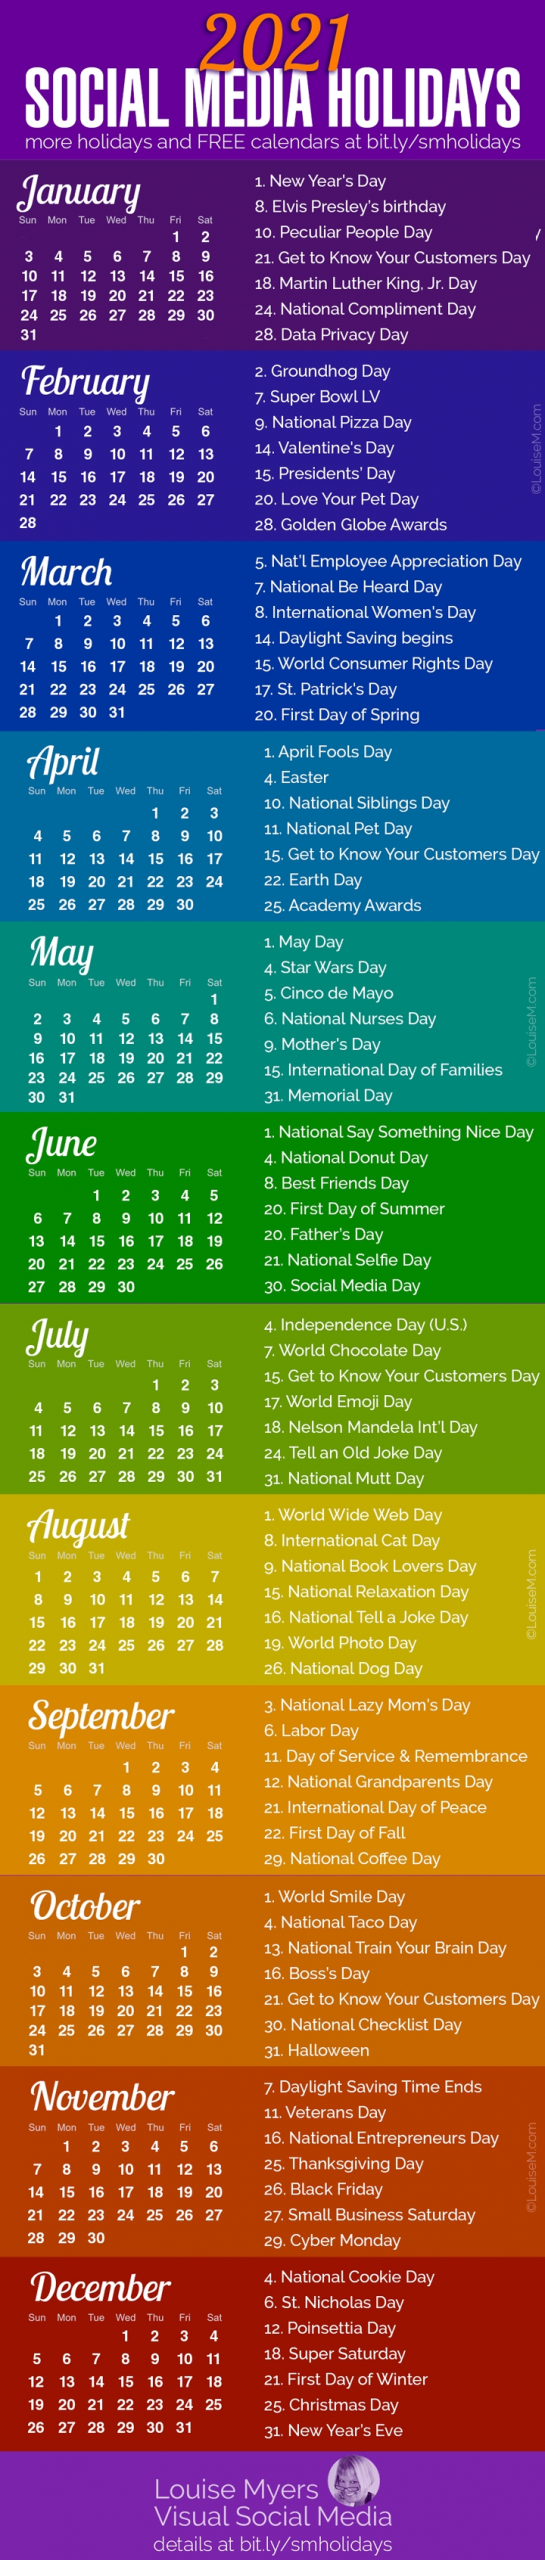 100+ Social Media Holidays You Need In 2020-21: Indispensable!-National Food Days In May 2021